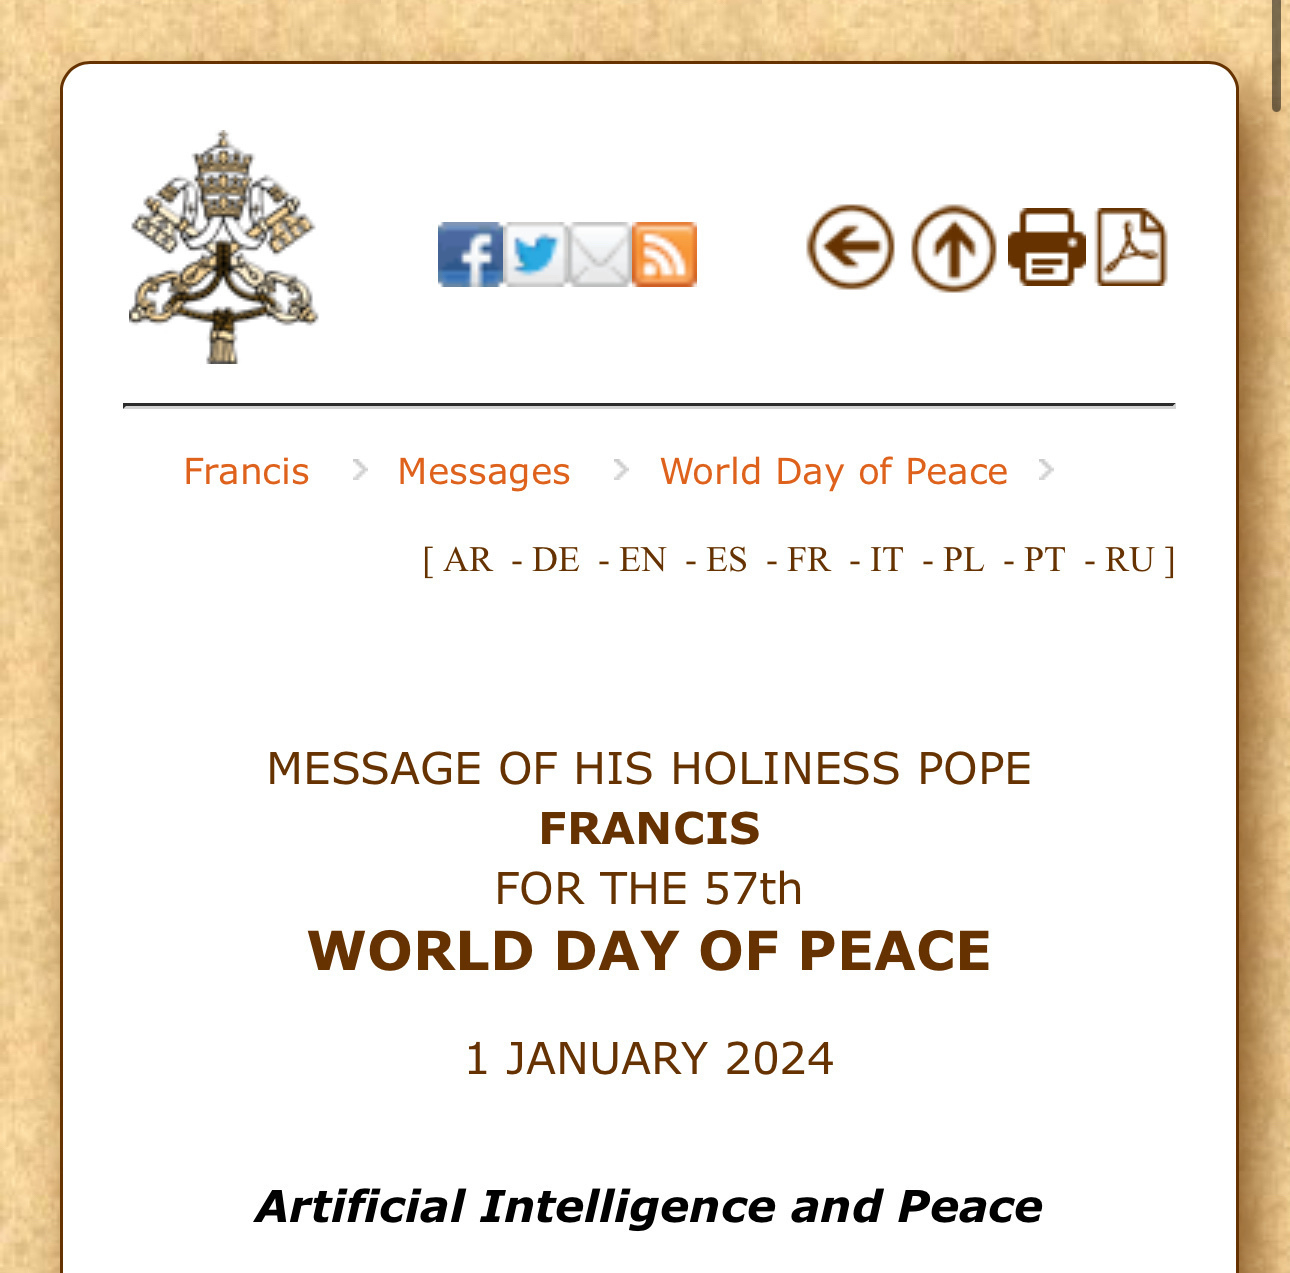 Francis. Message for the 57th World Day of Peace Artificial Intelligence and Peace (1 January 2024)